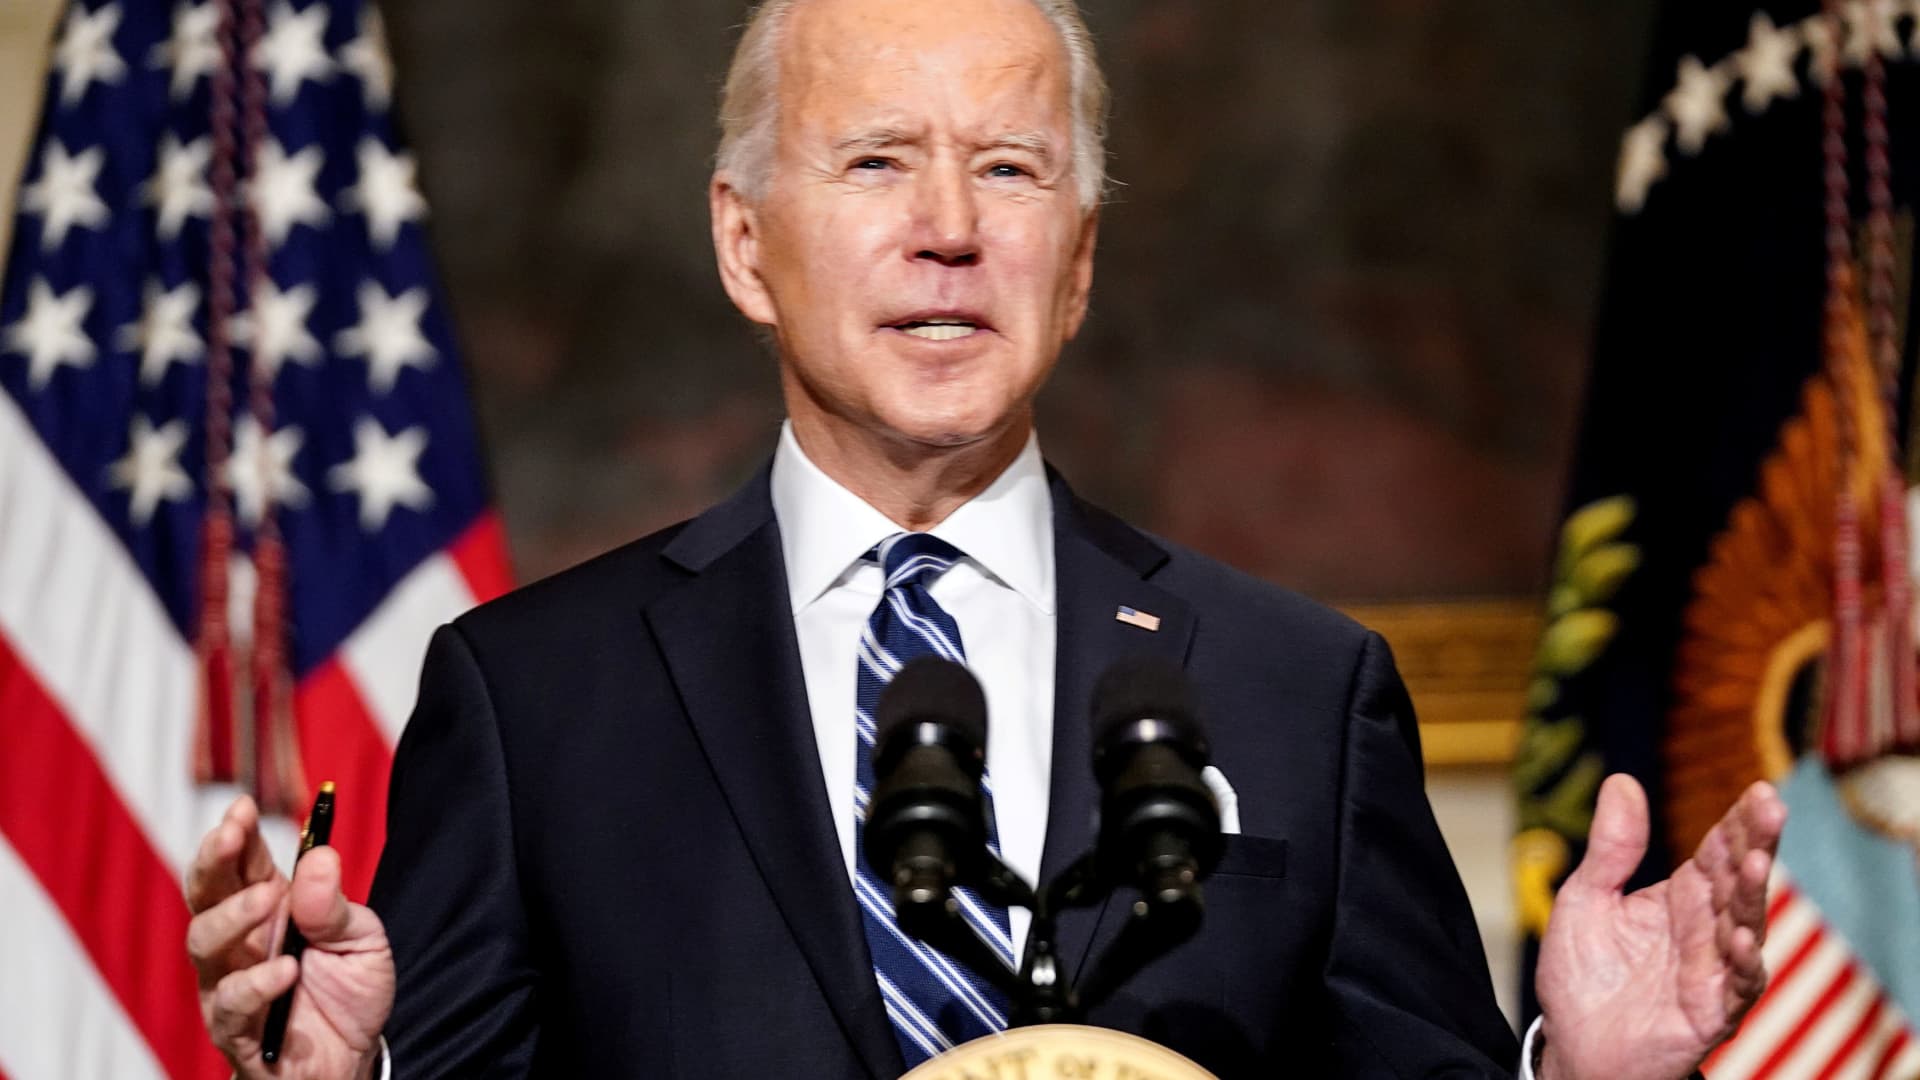 U.S. President Joe Biden delivers remarks on tackling climate change prior to signing executive actions in the State Dining Room at the White House in Washington, January 27, 2021.